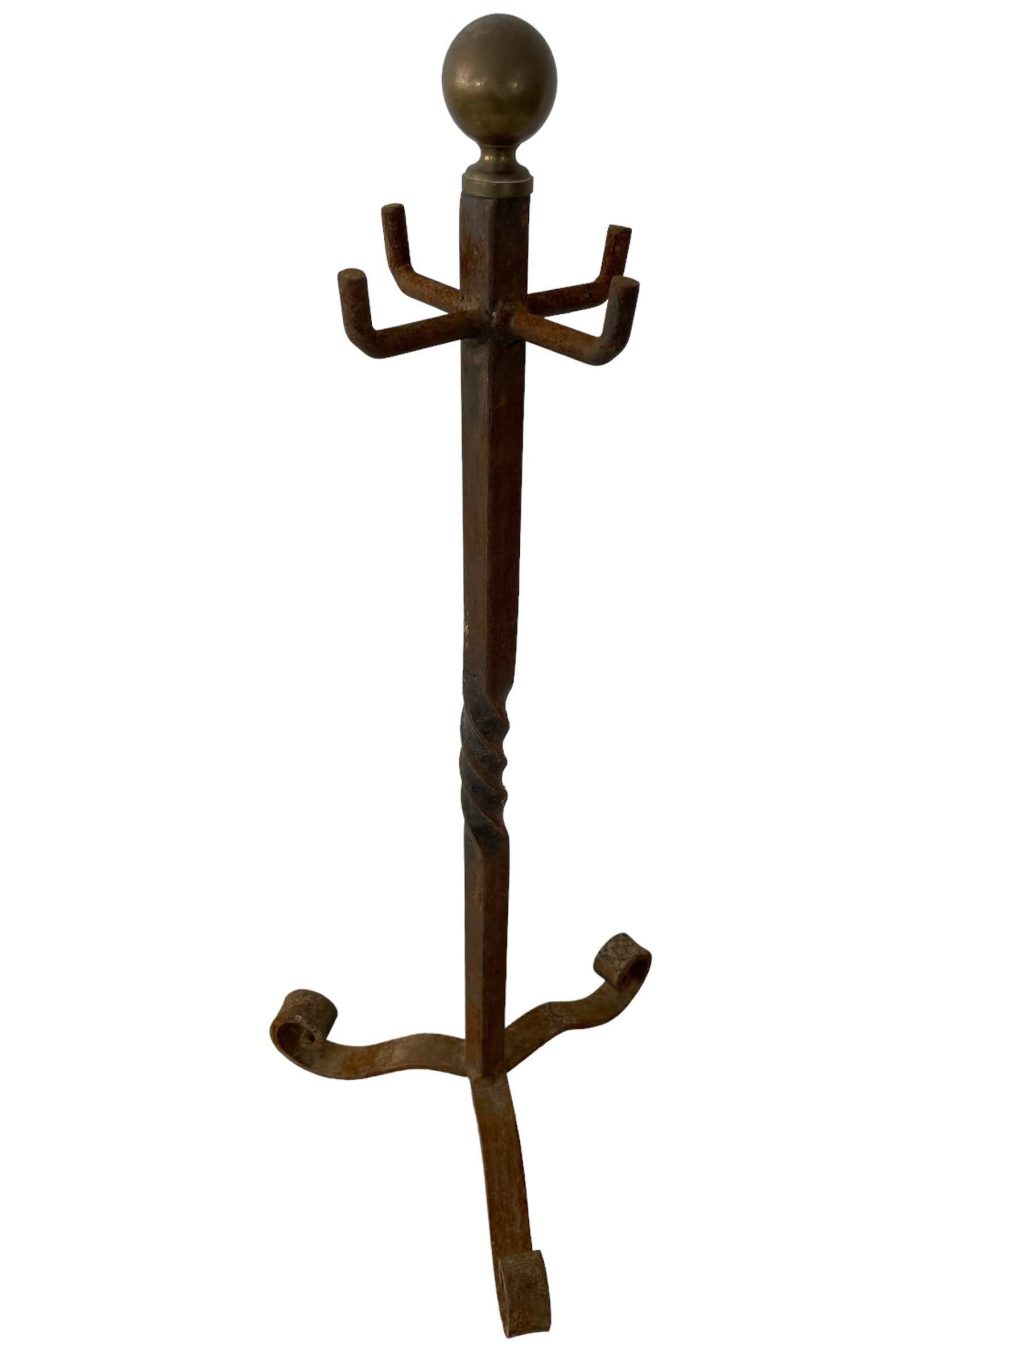 Vintage French Iron Fireplace Tools Hanger Stand Fire Display Tool circa 1960-70’s / EVE